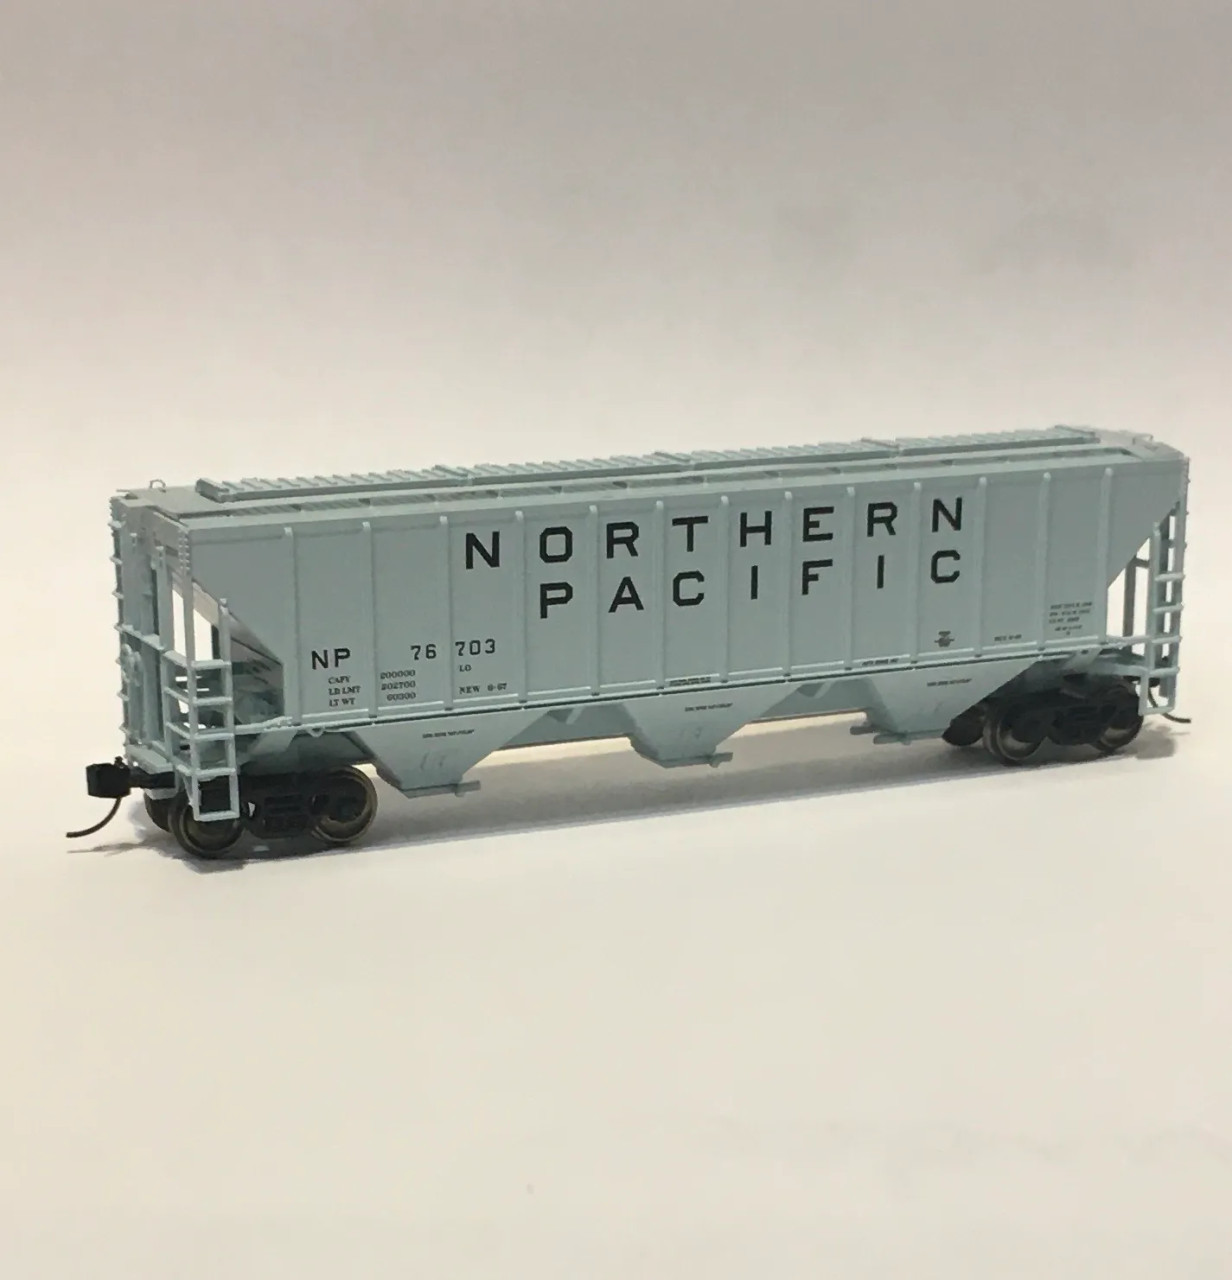 Trainworx 24433-02 N Pullman-Standard PS 4427 Covered Hopper - Northern Pacific # 76777